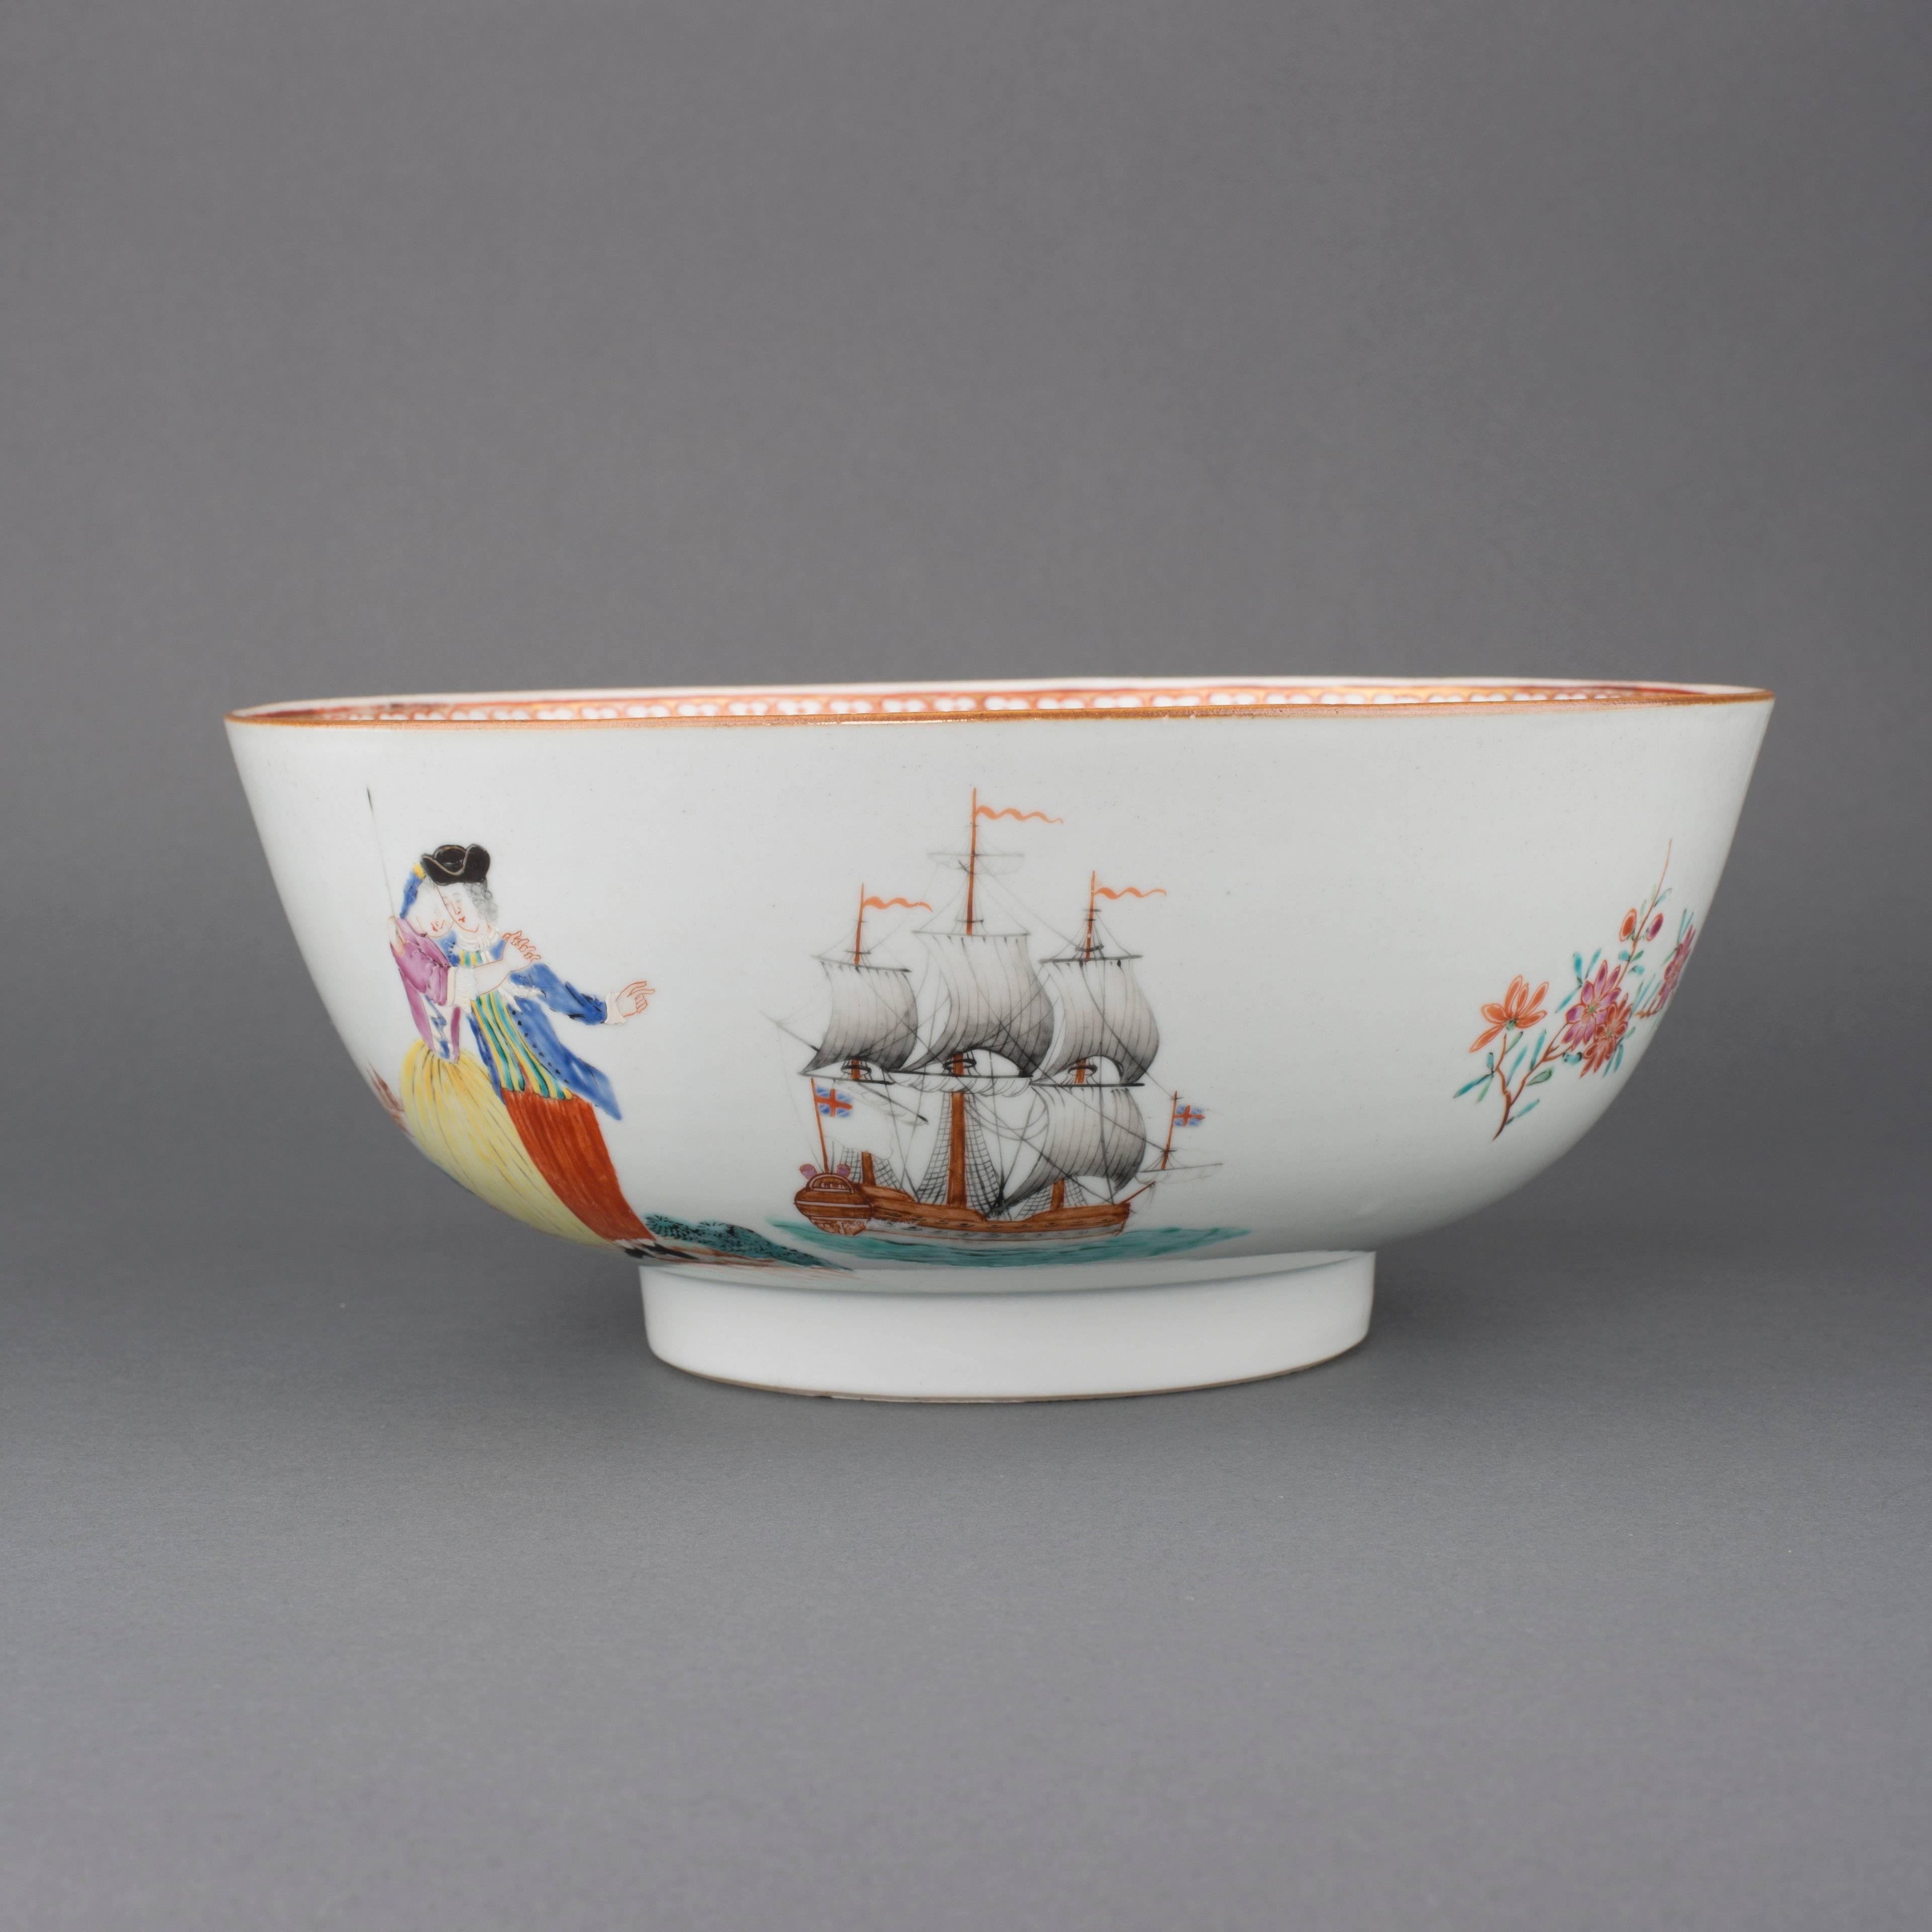 Qing Chinese Export Porcelain Famille Rose Punch Bowl “The Sailor's Farewell”,